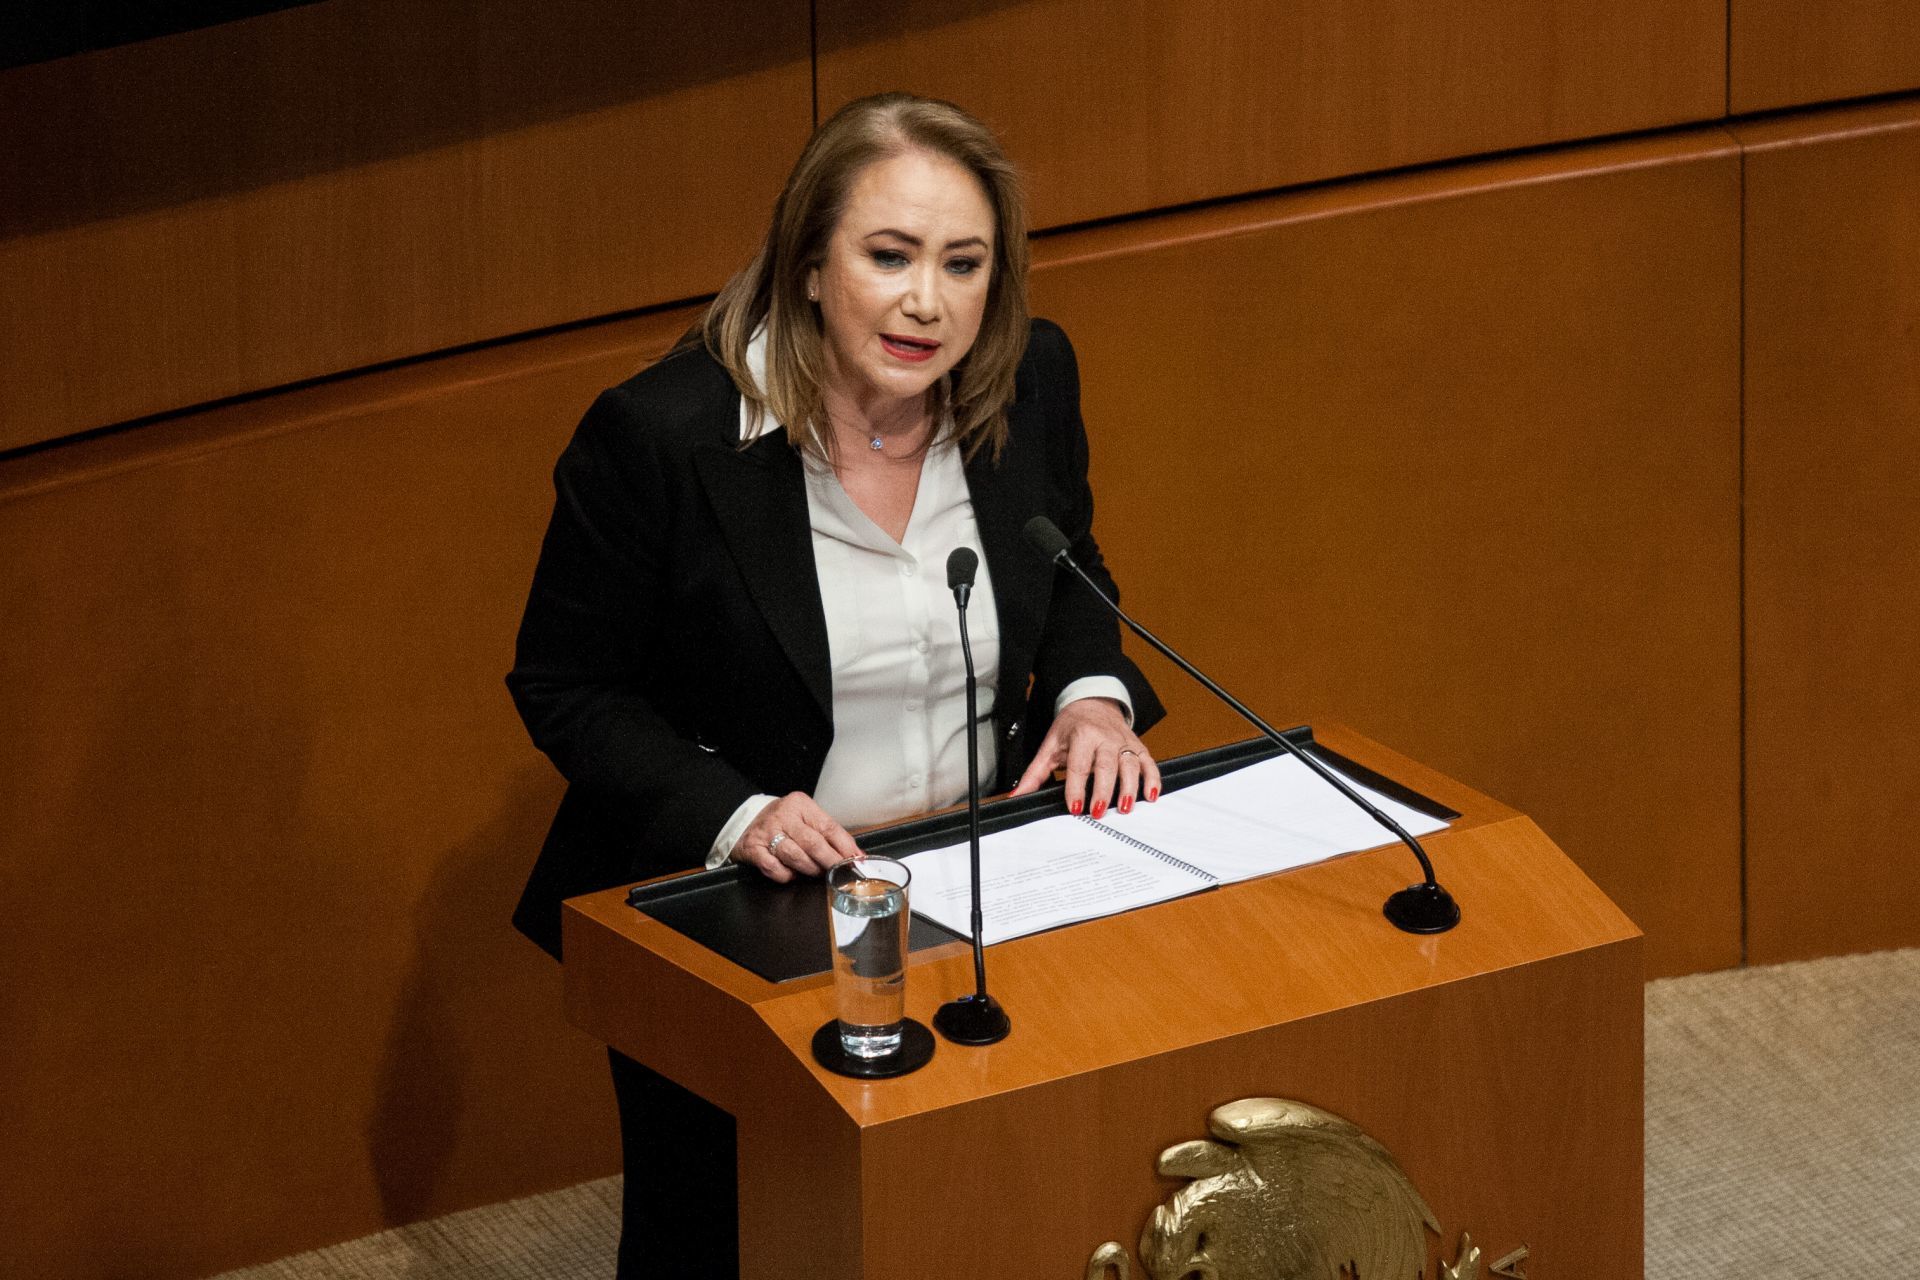 Despite the fact that the plagiarism carried out by Yasmín Esquivel in her academic work was verified, so far no actions have been taken to sanction her (Photo: Cuartoscuro.com/Galo Cañas Rodríguez)